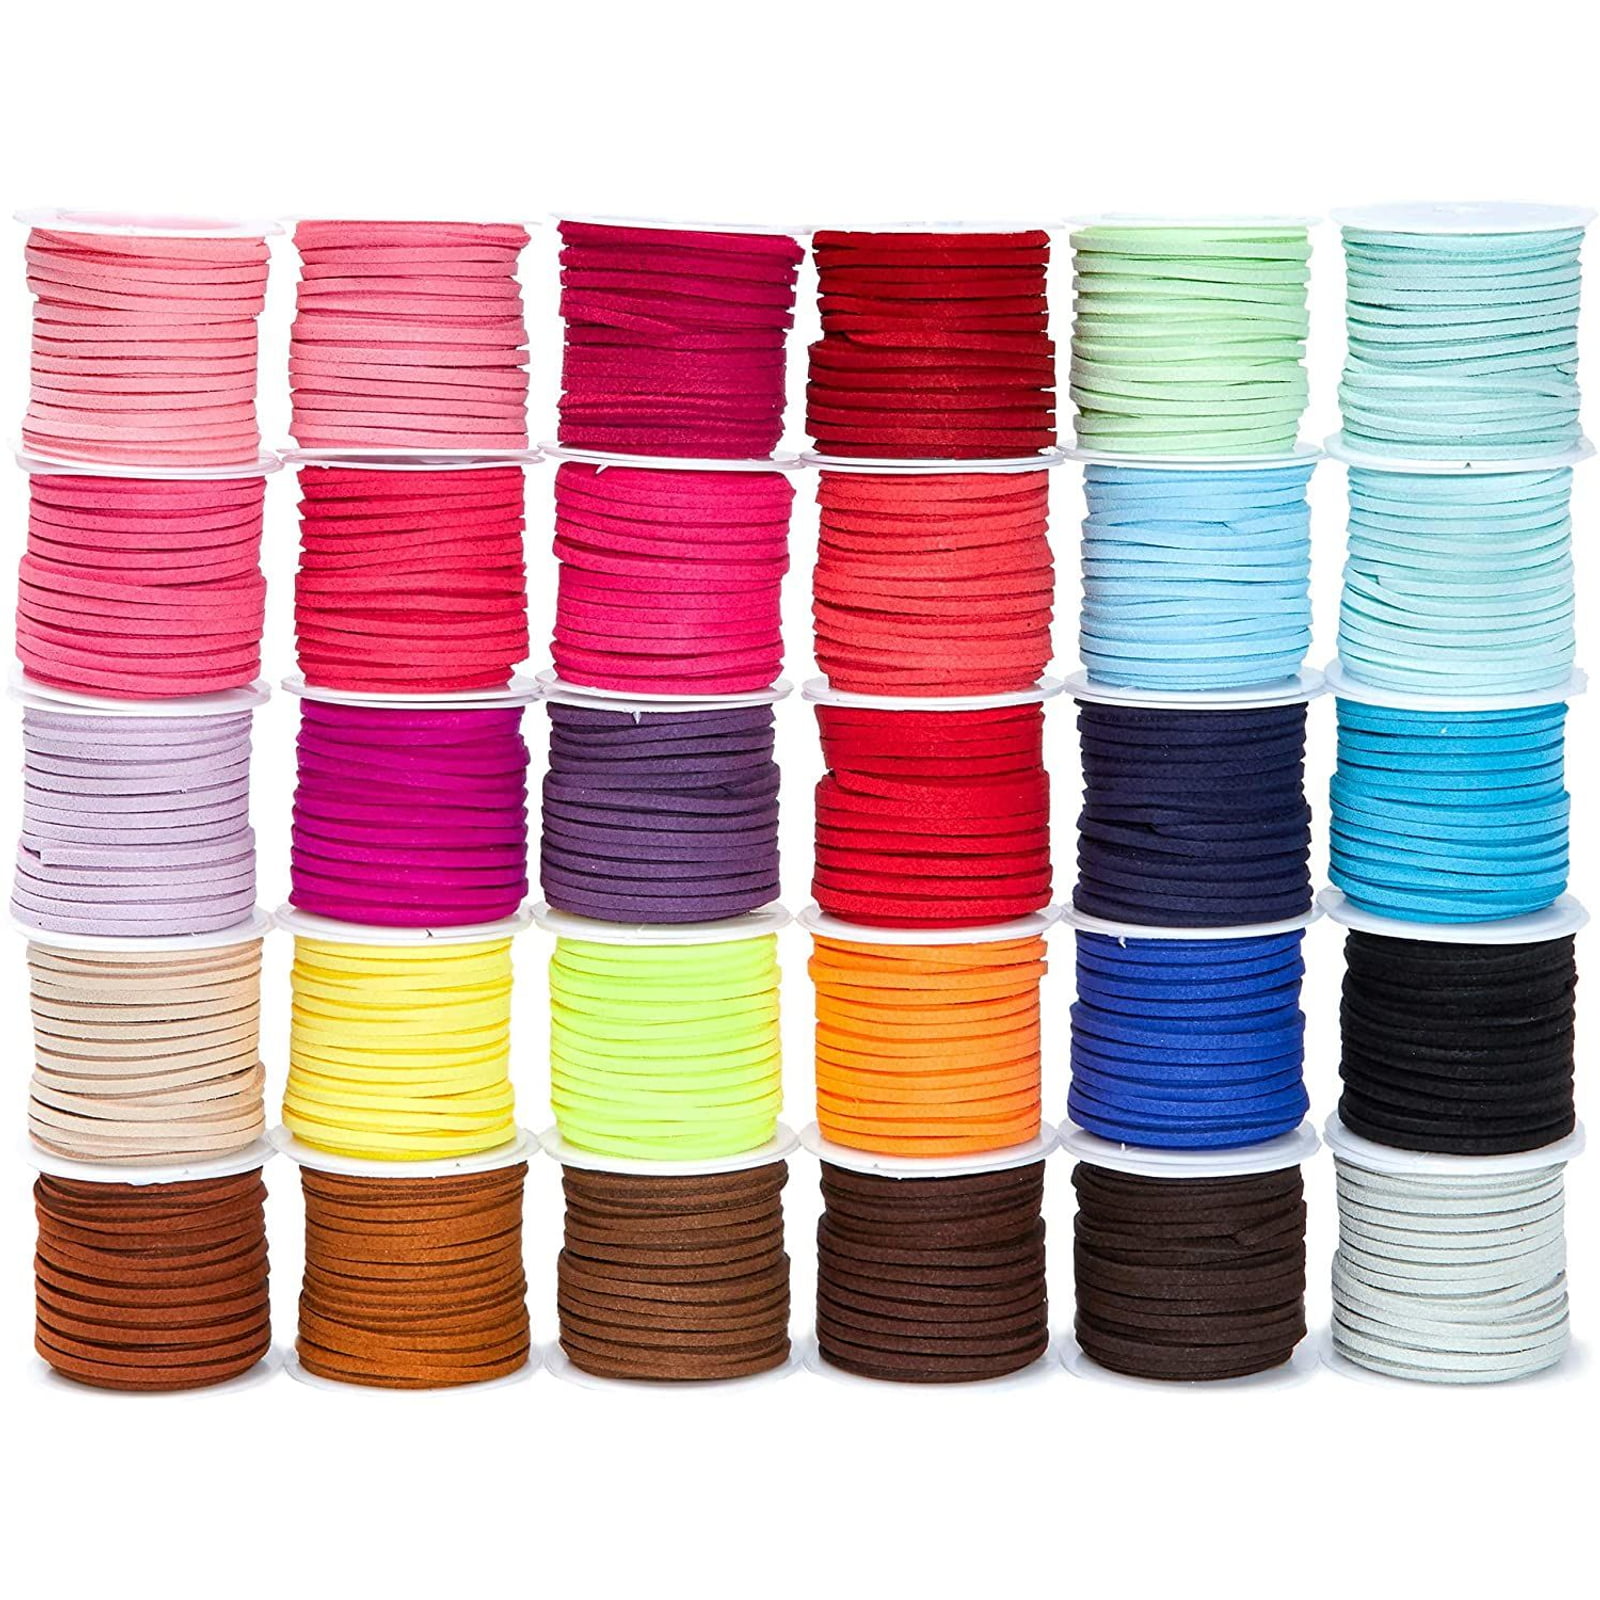 wholesale 5/100yd 3mm Suede Leather String Jewelry Making Thread Cords 